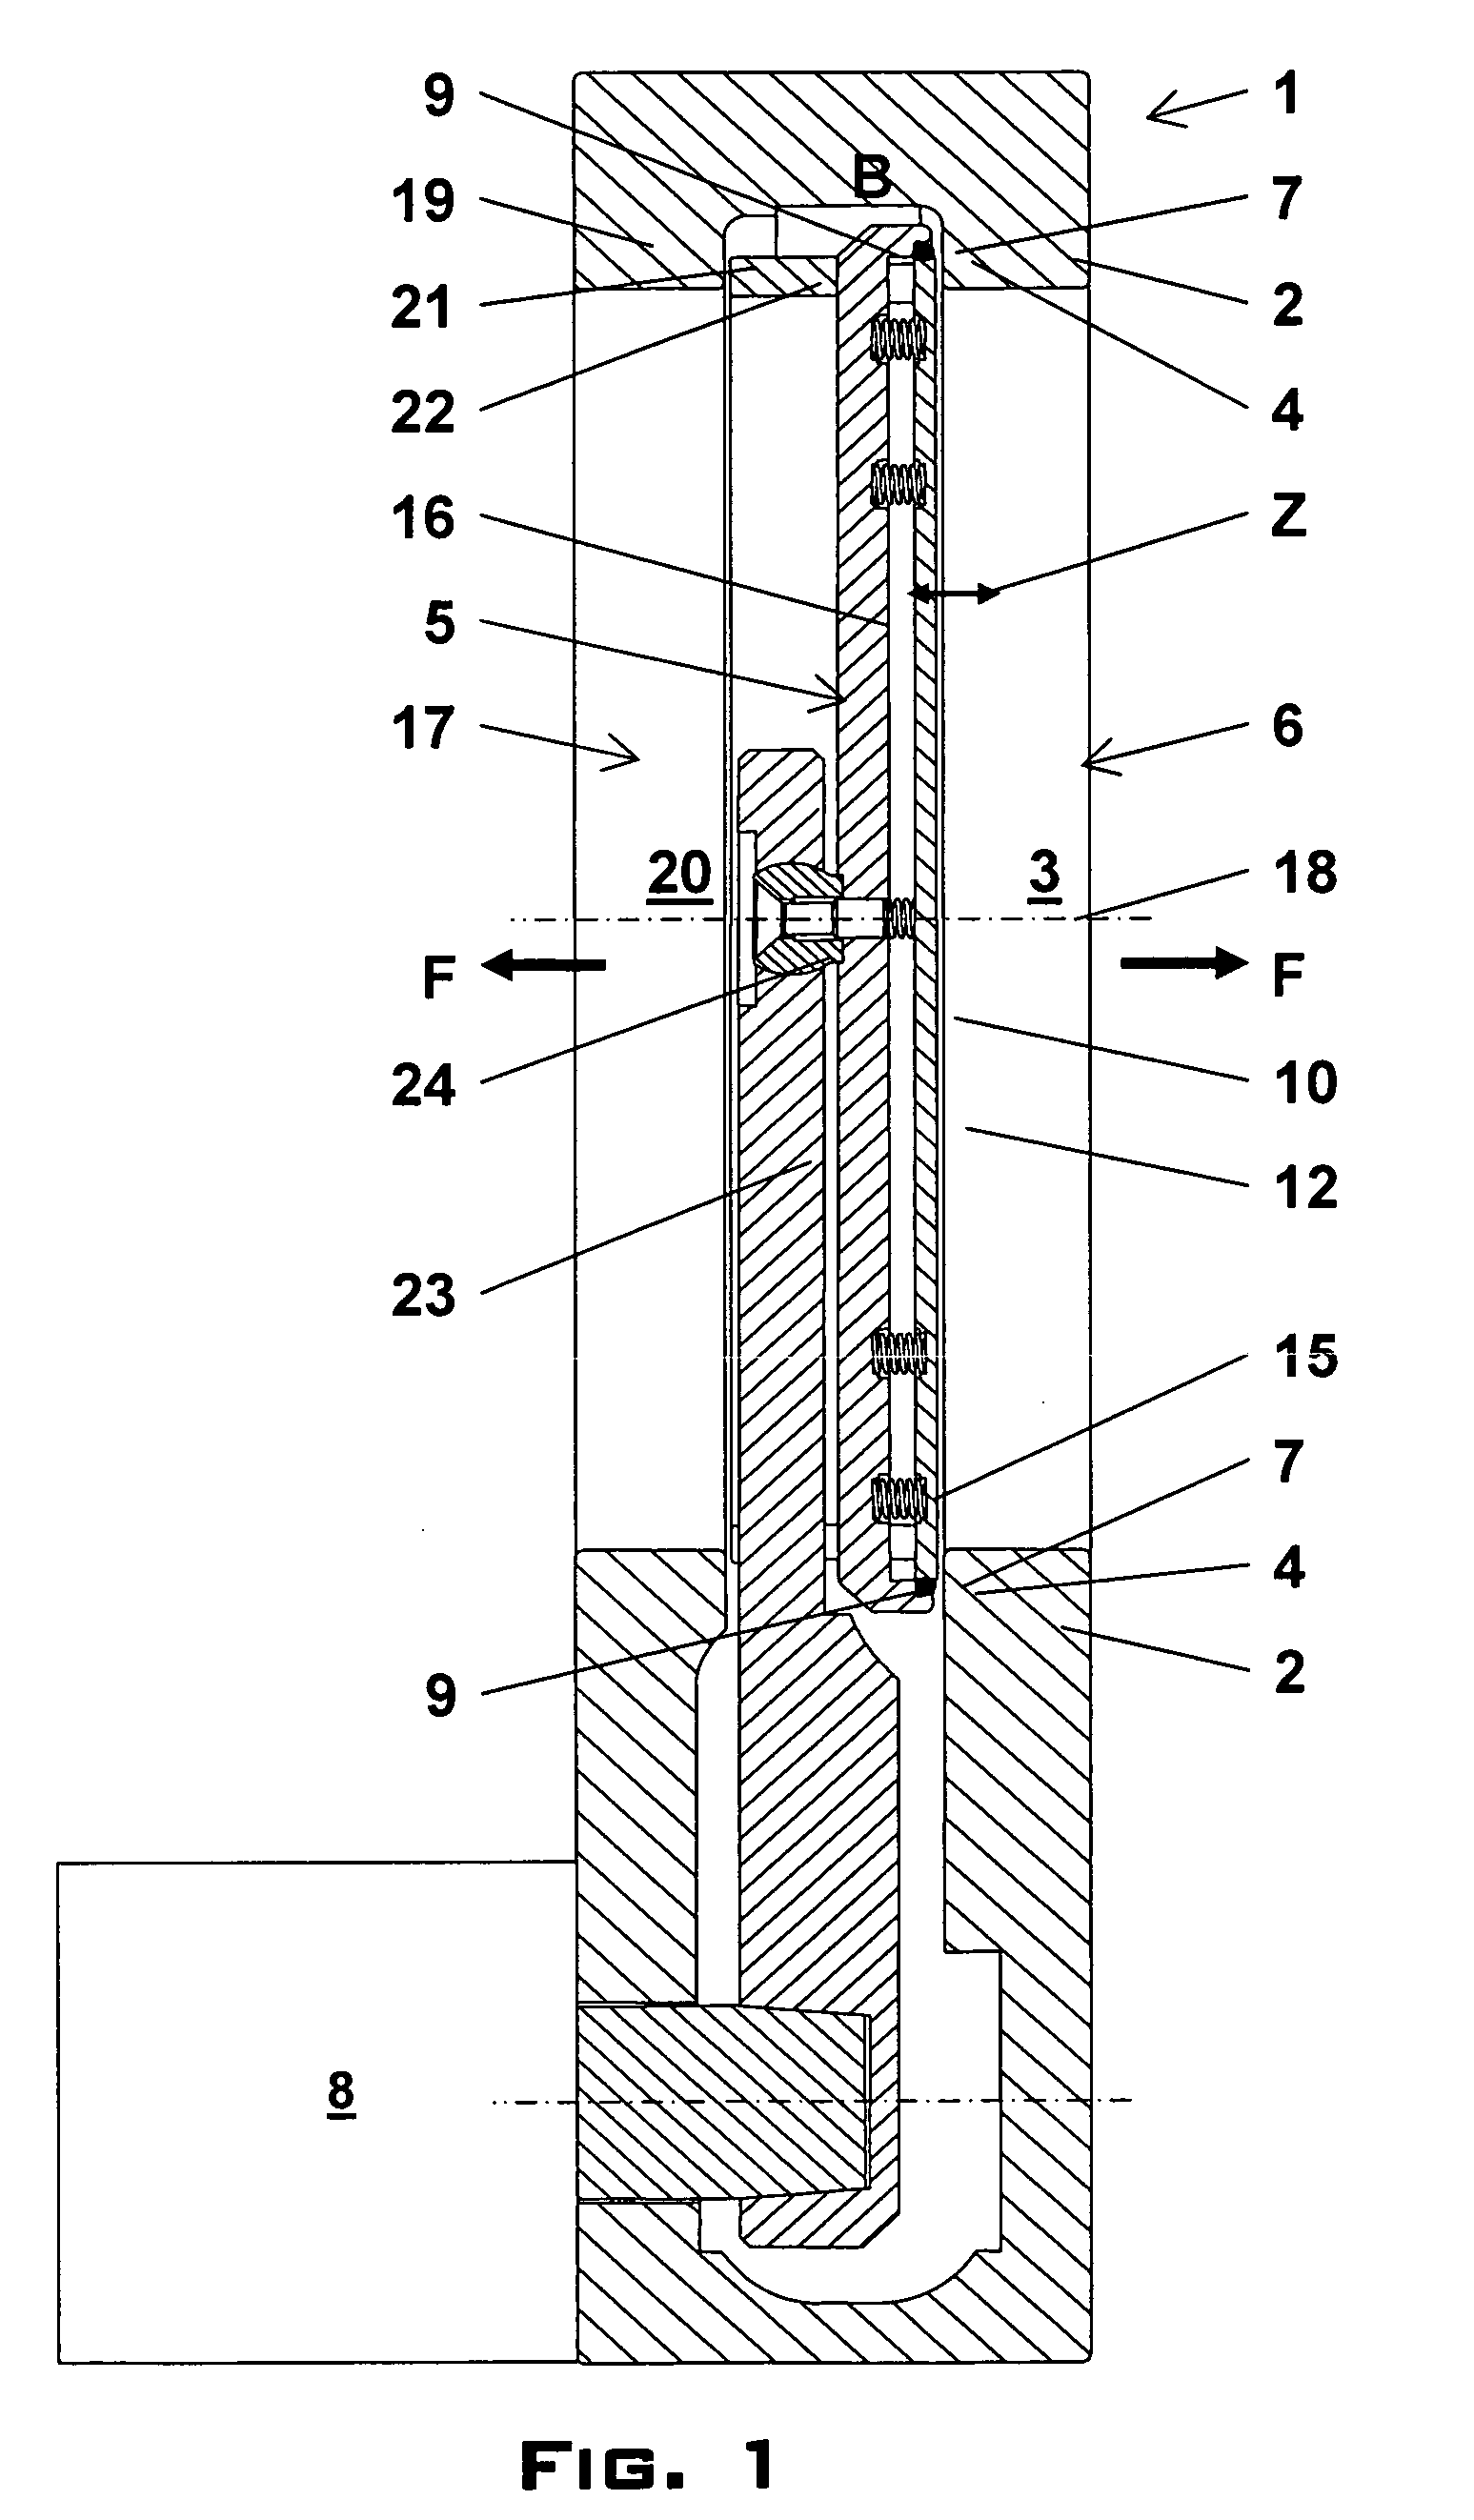 Valve for essentially gastight closing a flow path